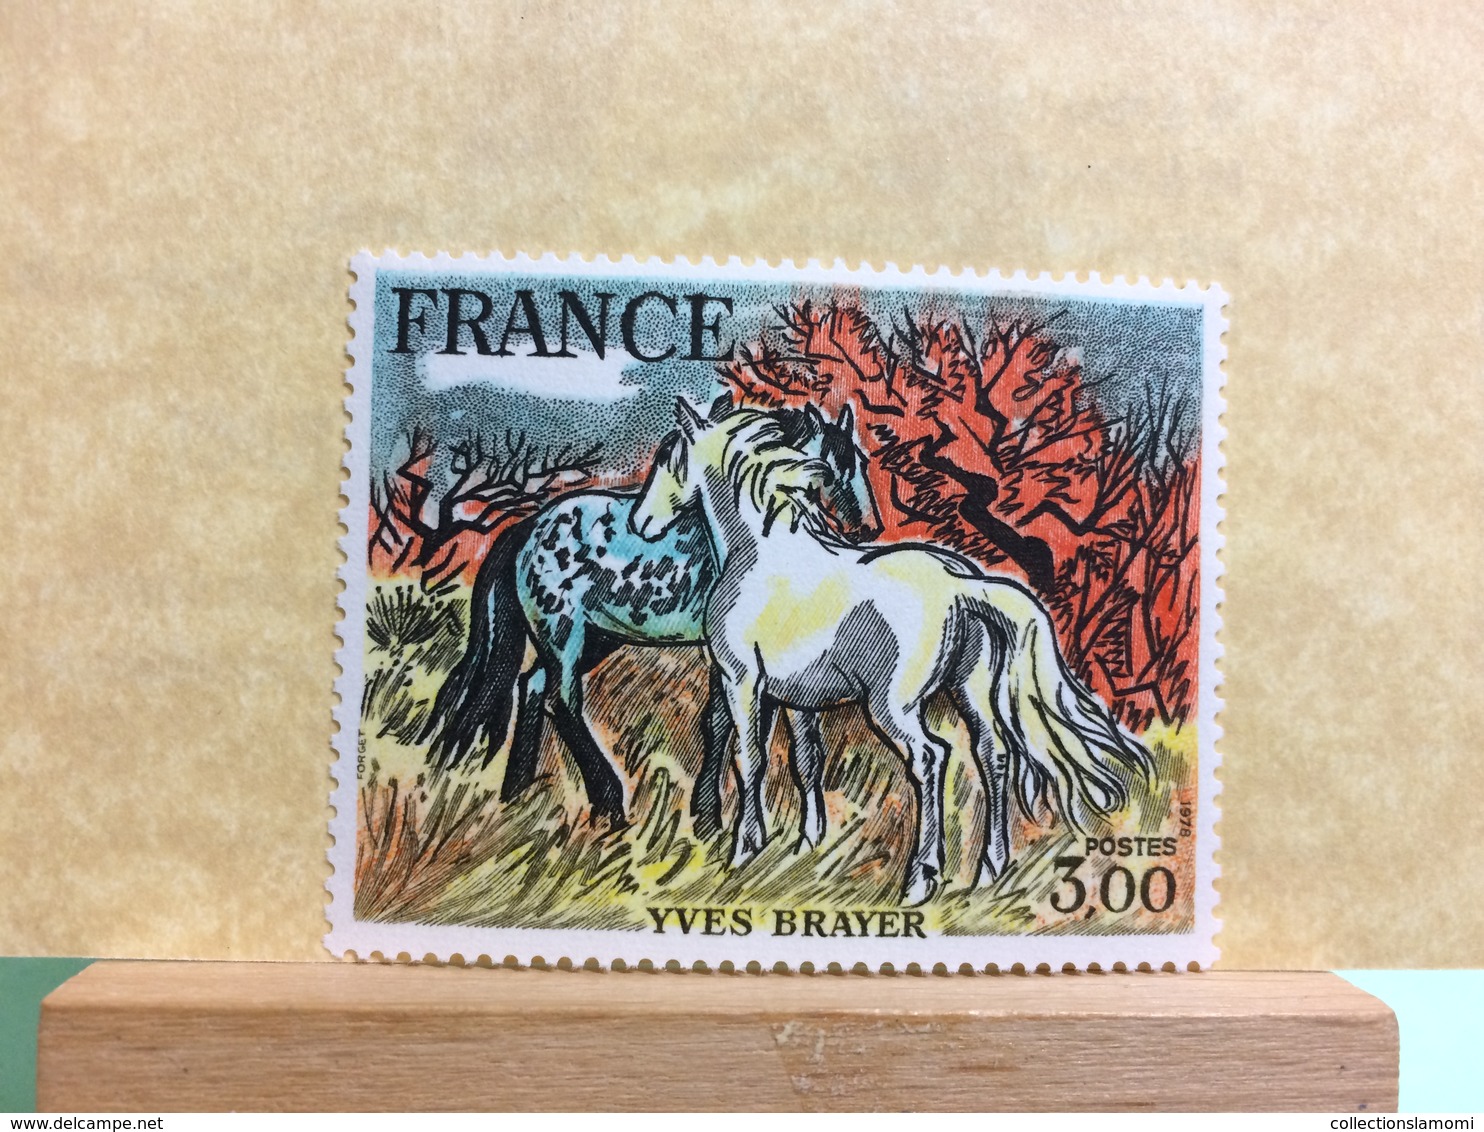 France (Yves Brayer Oeuvre D'art) 1978 - Neuf (Y&T N°2026)  - Coté1,80€ - Unused Stamps